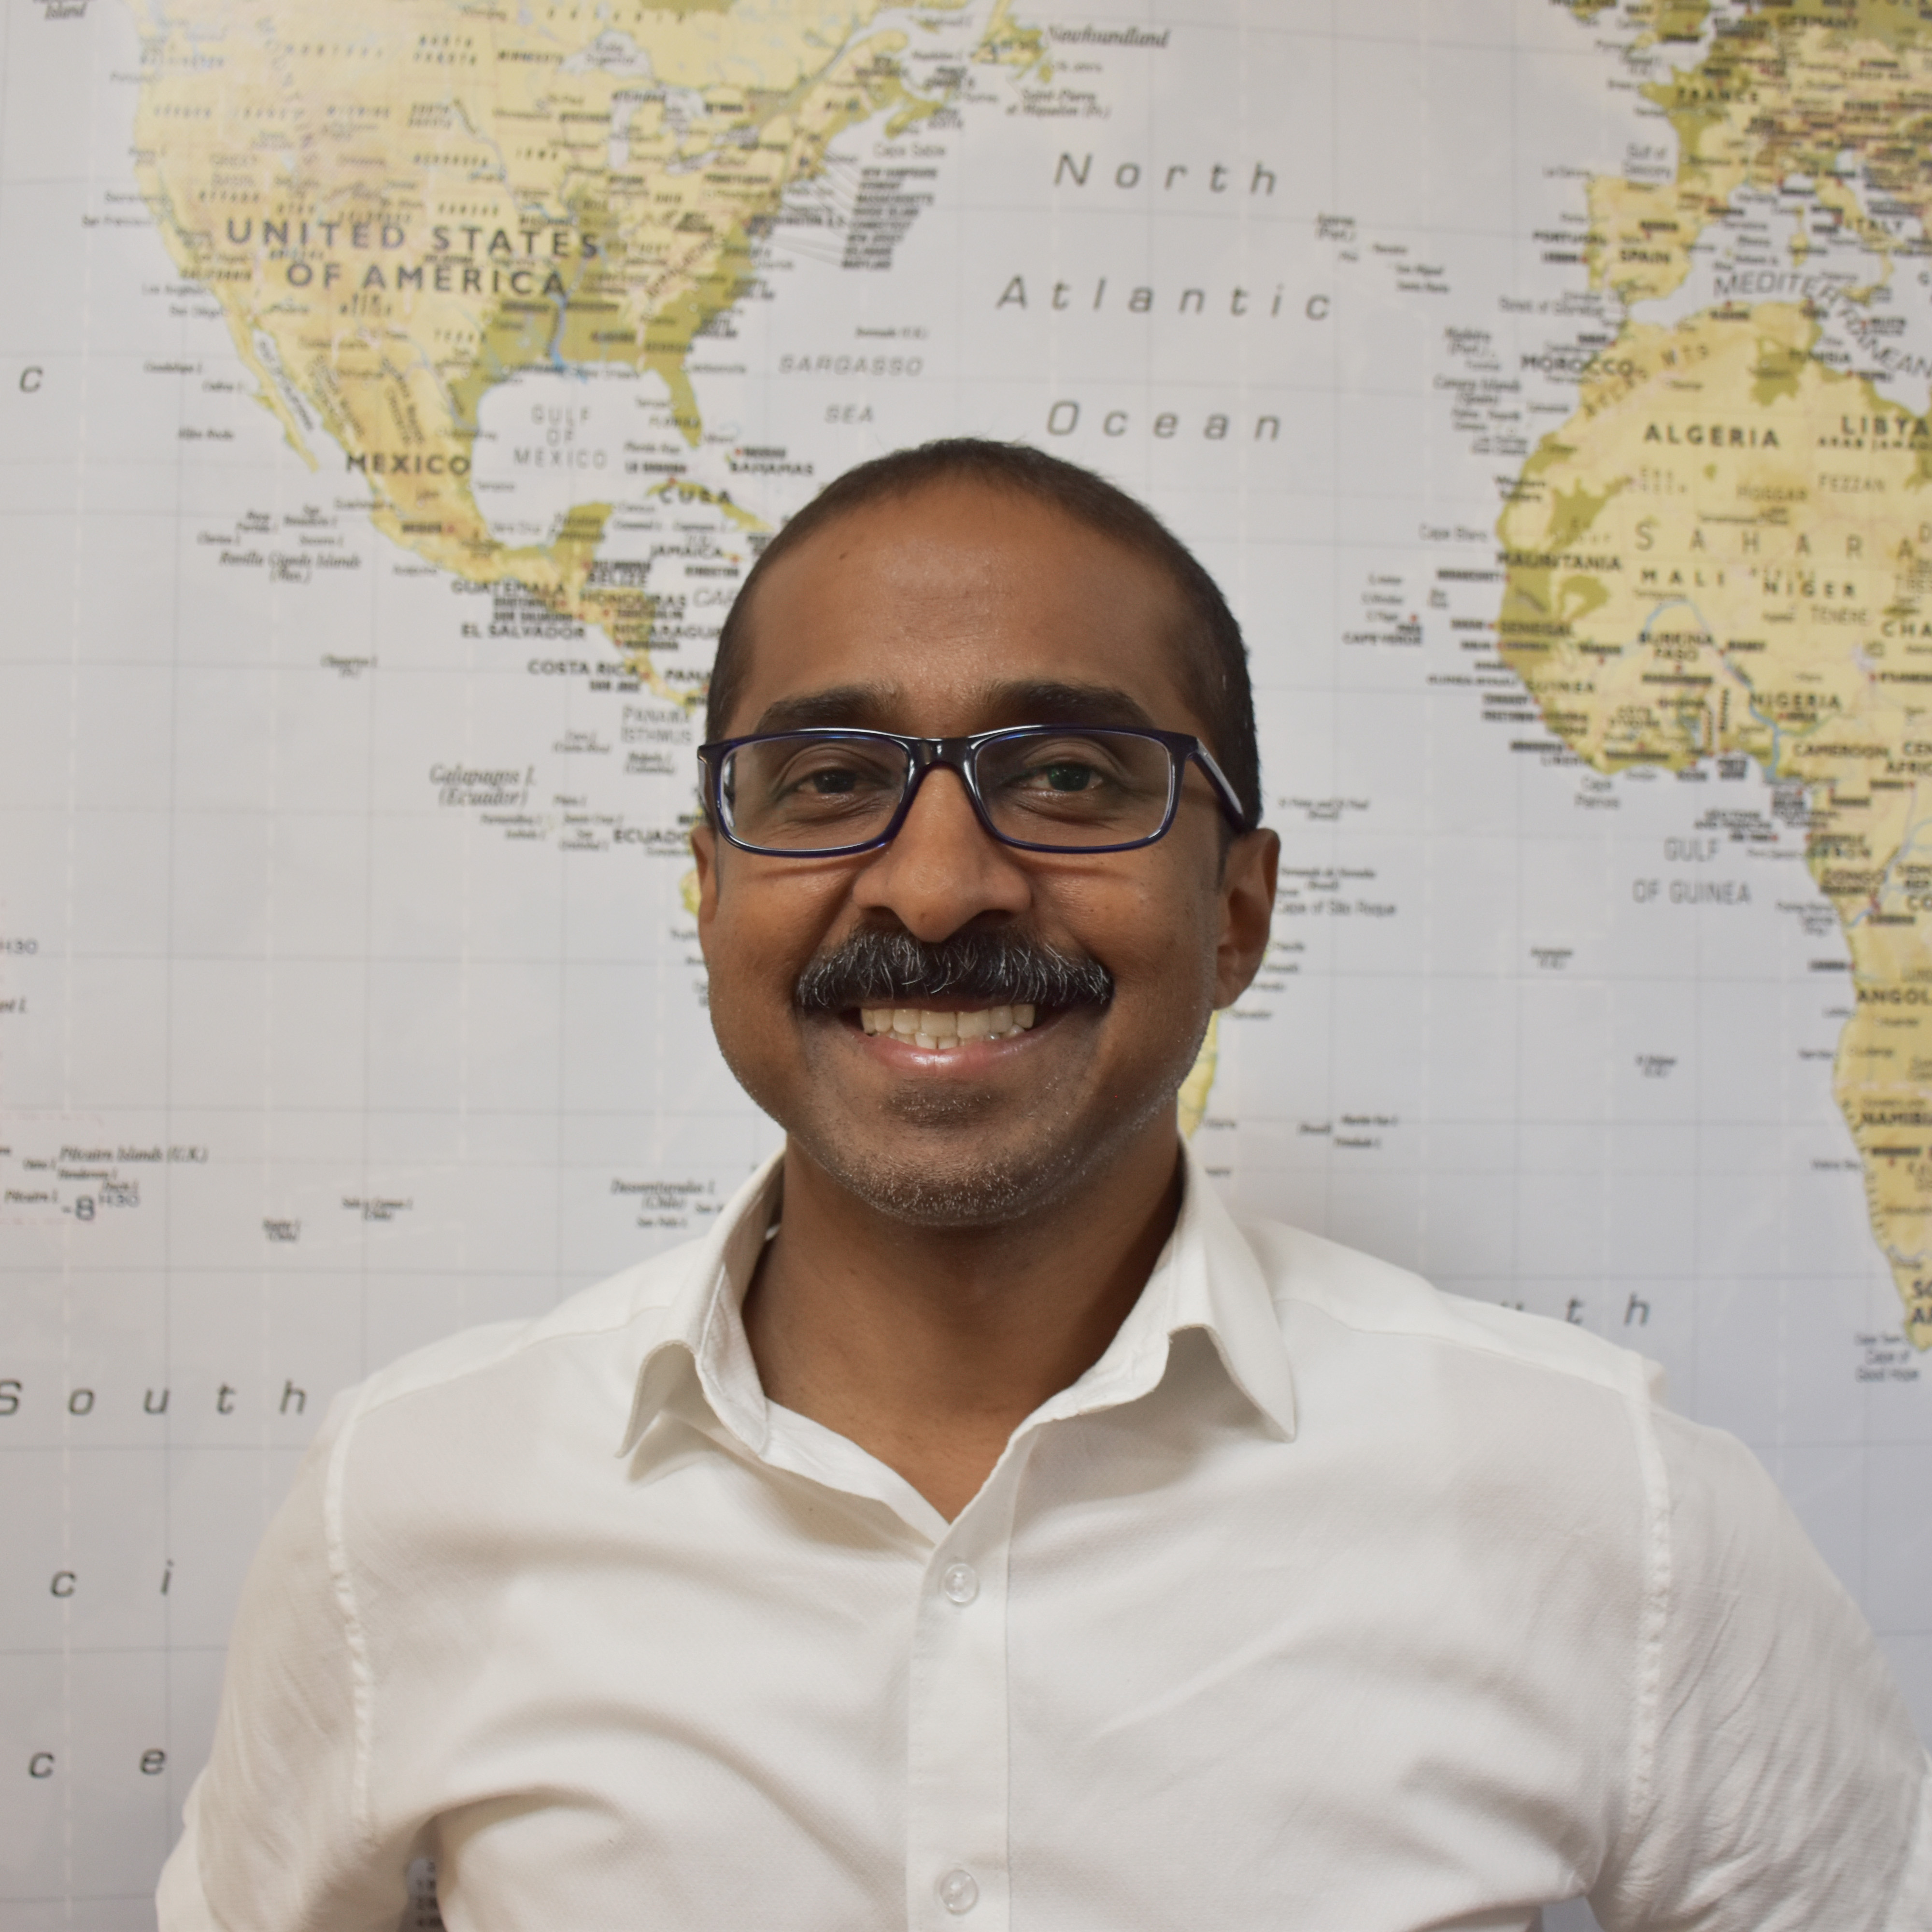 Jay Arasan, Associate Director, smiling in front a world map